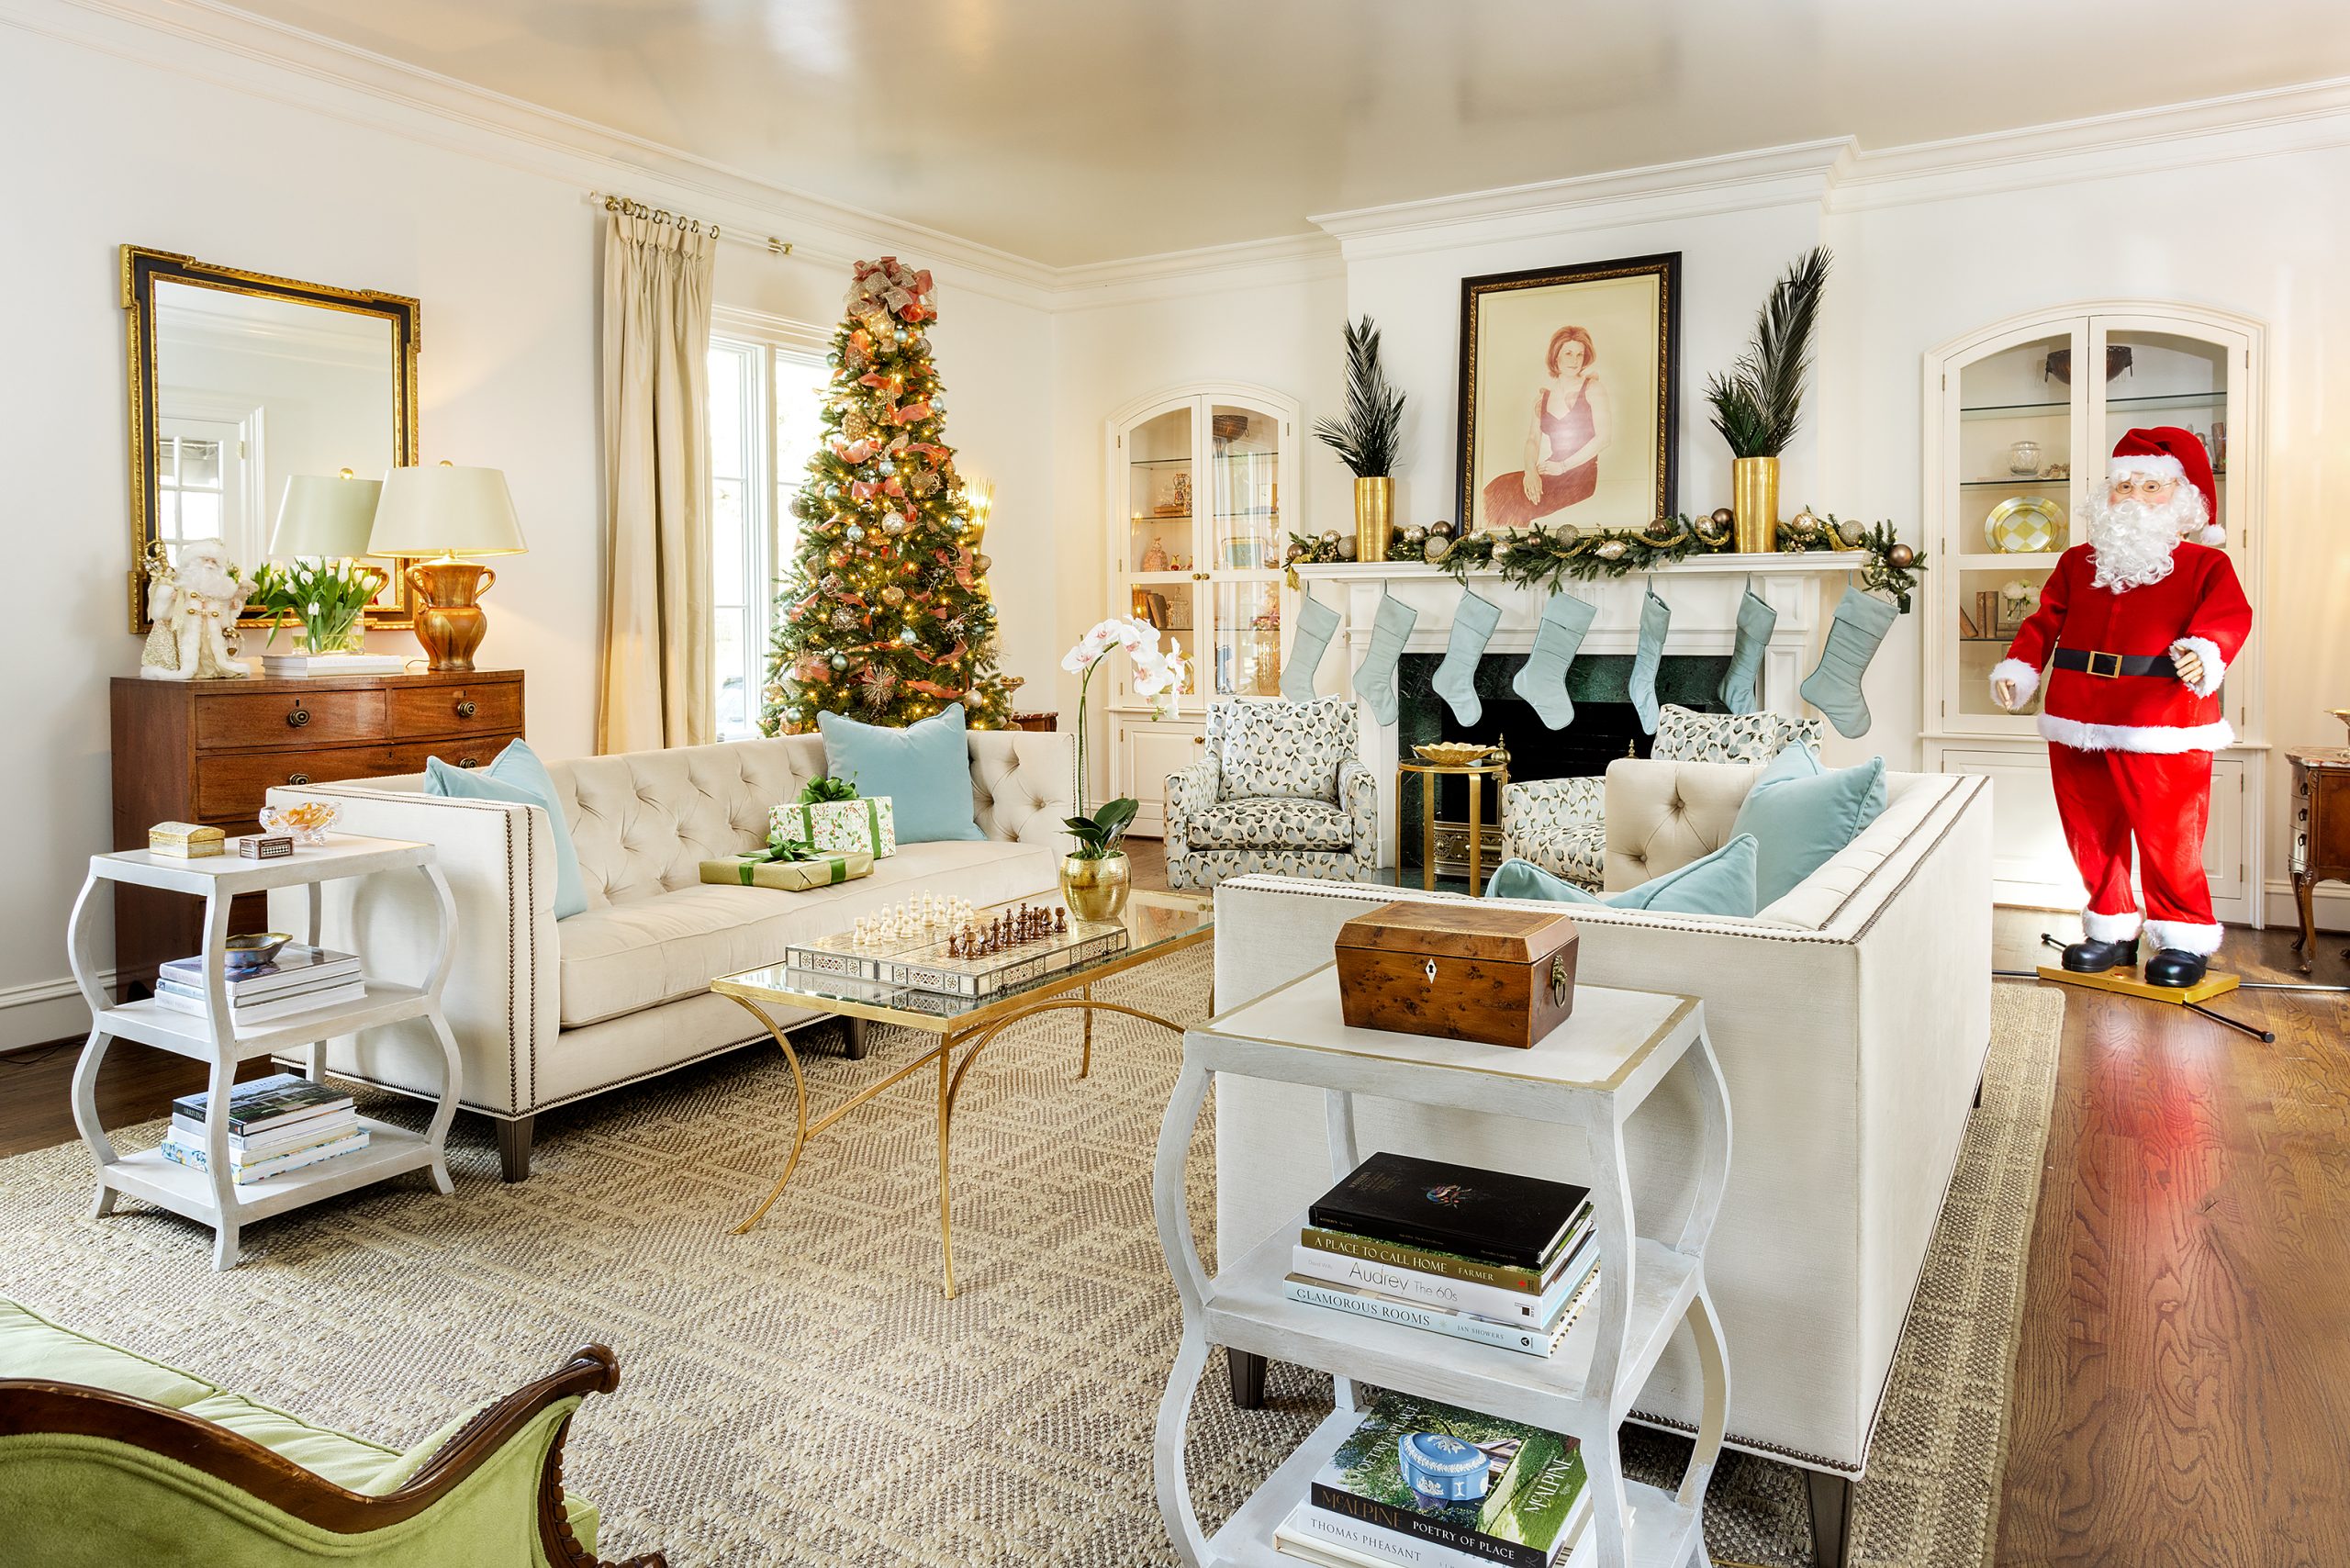 Though Elyse was able to incorporate most of the furniture from their Gregg Park home, the cool neutrals that she and Rossi selected gave them the opportunity to rethink the home’s holiday decor. The Christmas tree is surrounded by a pale blue skirt and stockings that mirror the accent fabrics used throughout. During the holidays, a surprisingly realistic, full-sized Santa Claus supervises the awed grandbabies! 